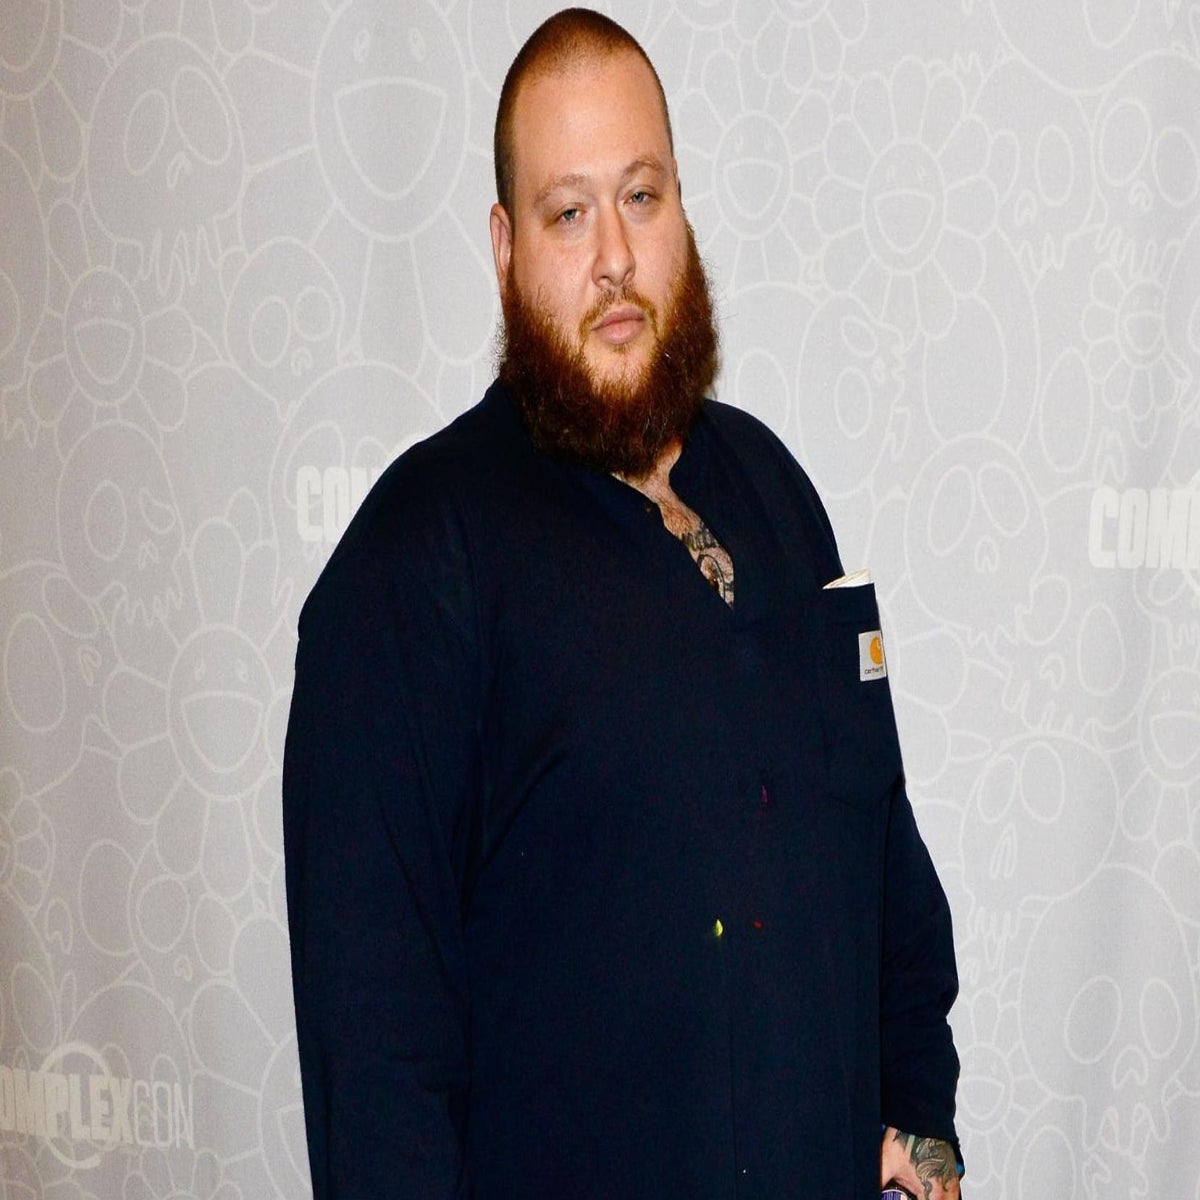 action bronson height